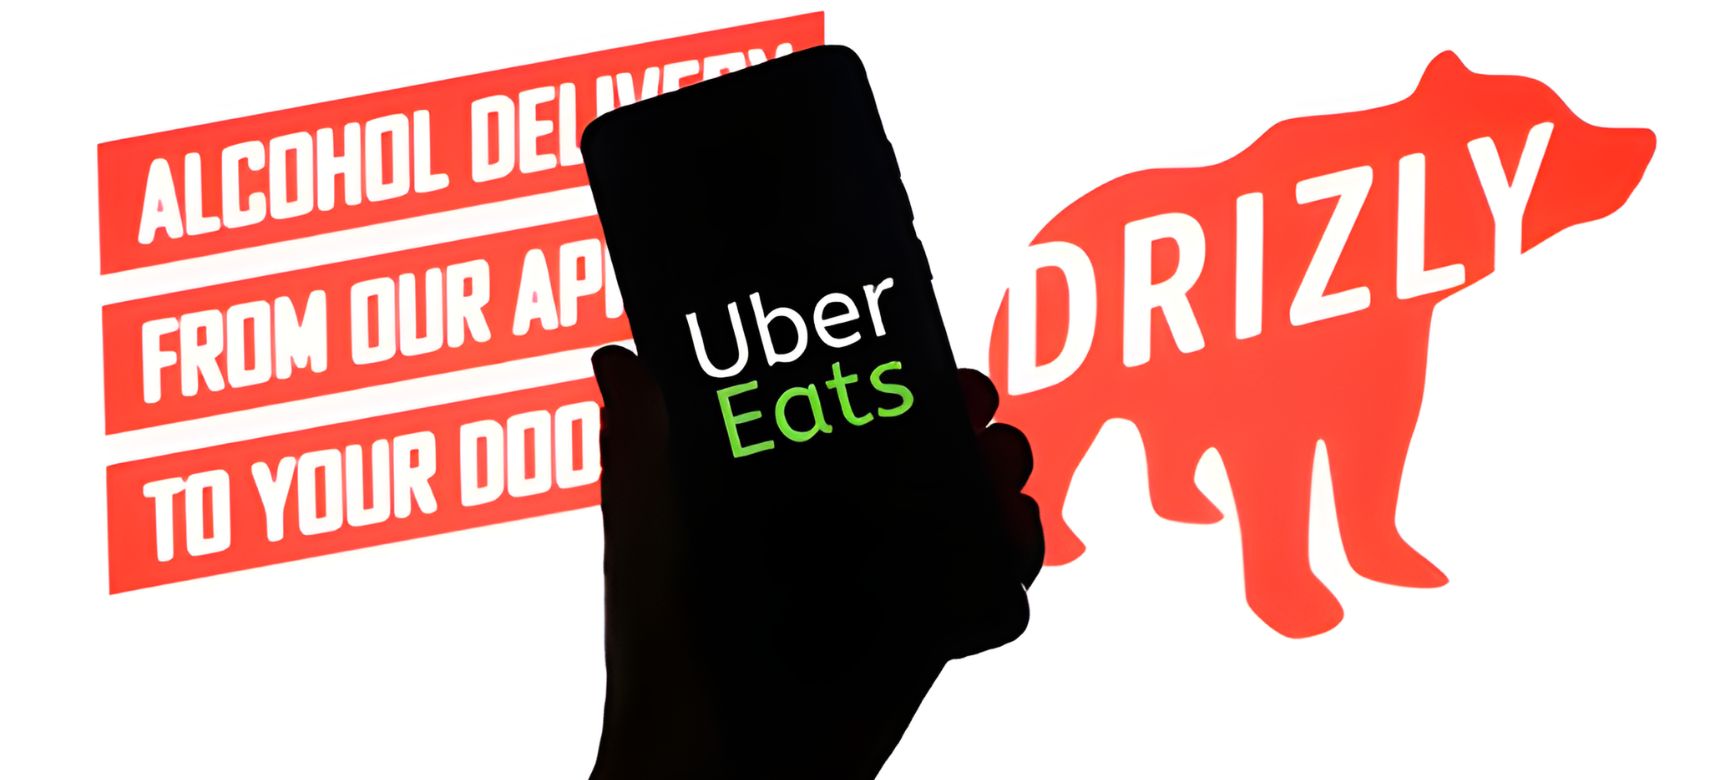 Photo for: Uber Shutters Drizly as a Distinct Brand: What are the Implications?